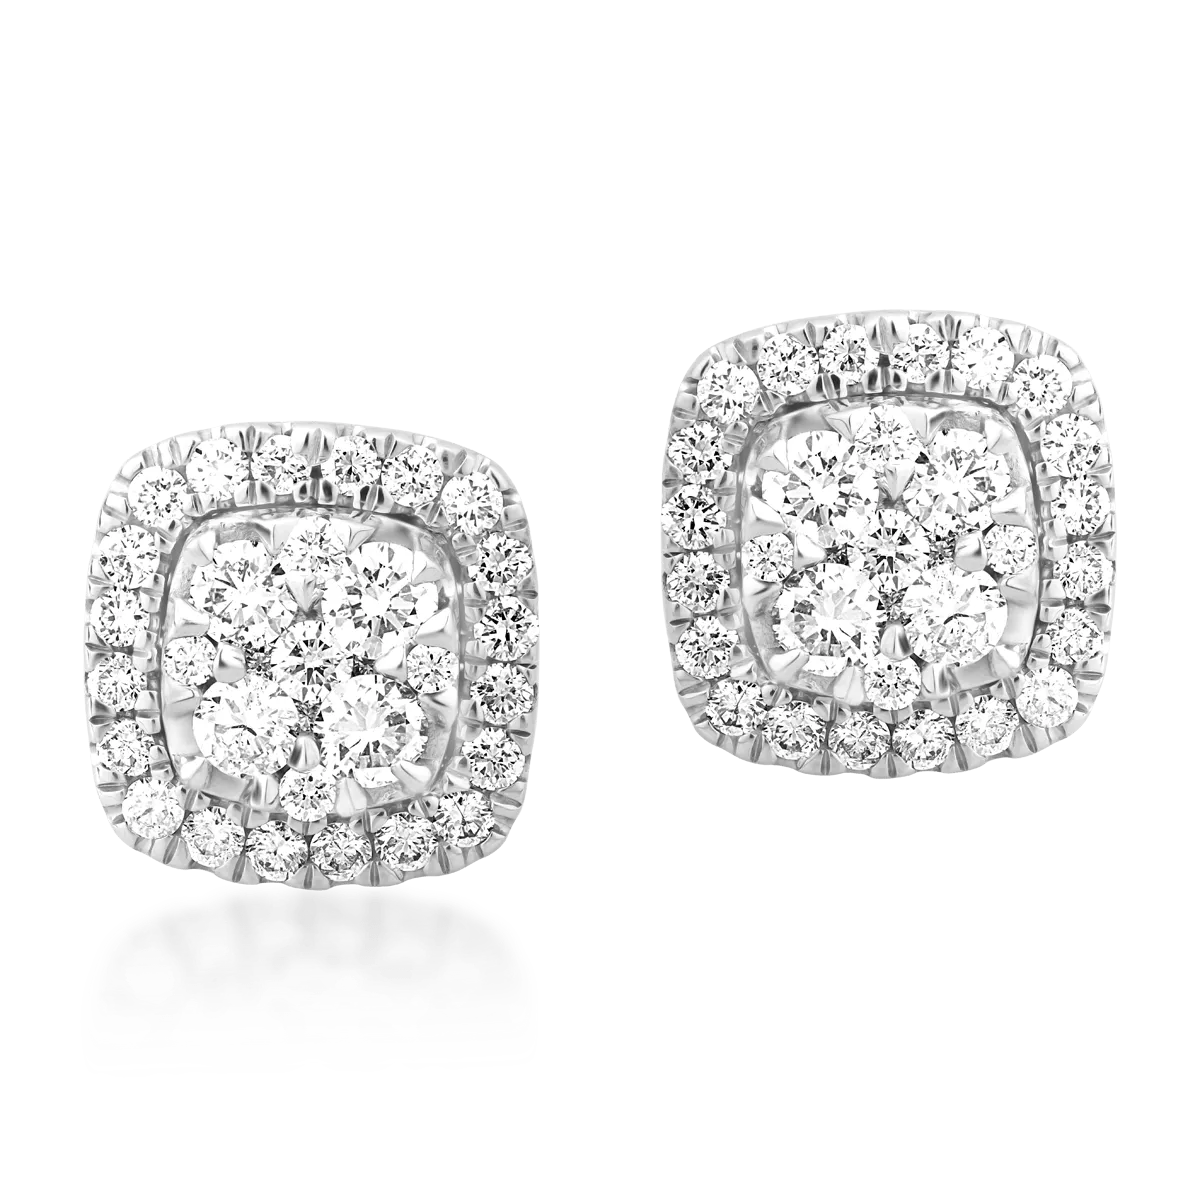 18K white gold earrings with 0.542ct diamonds